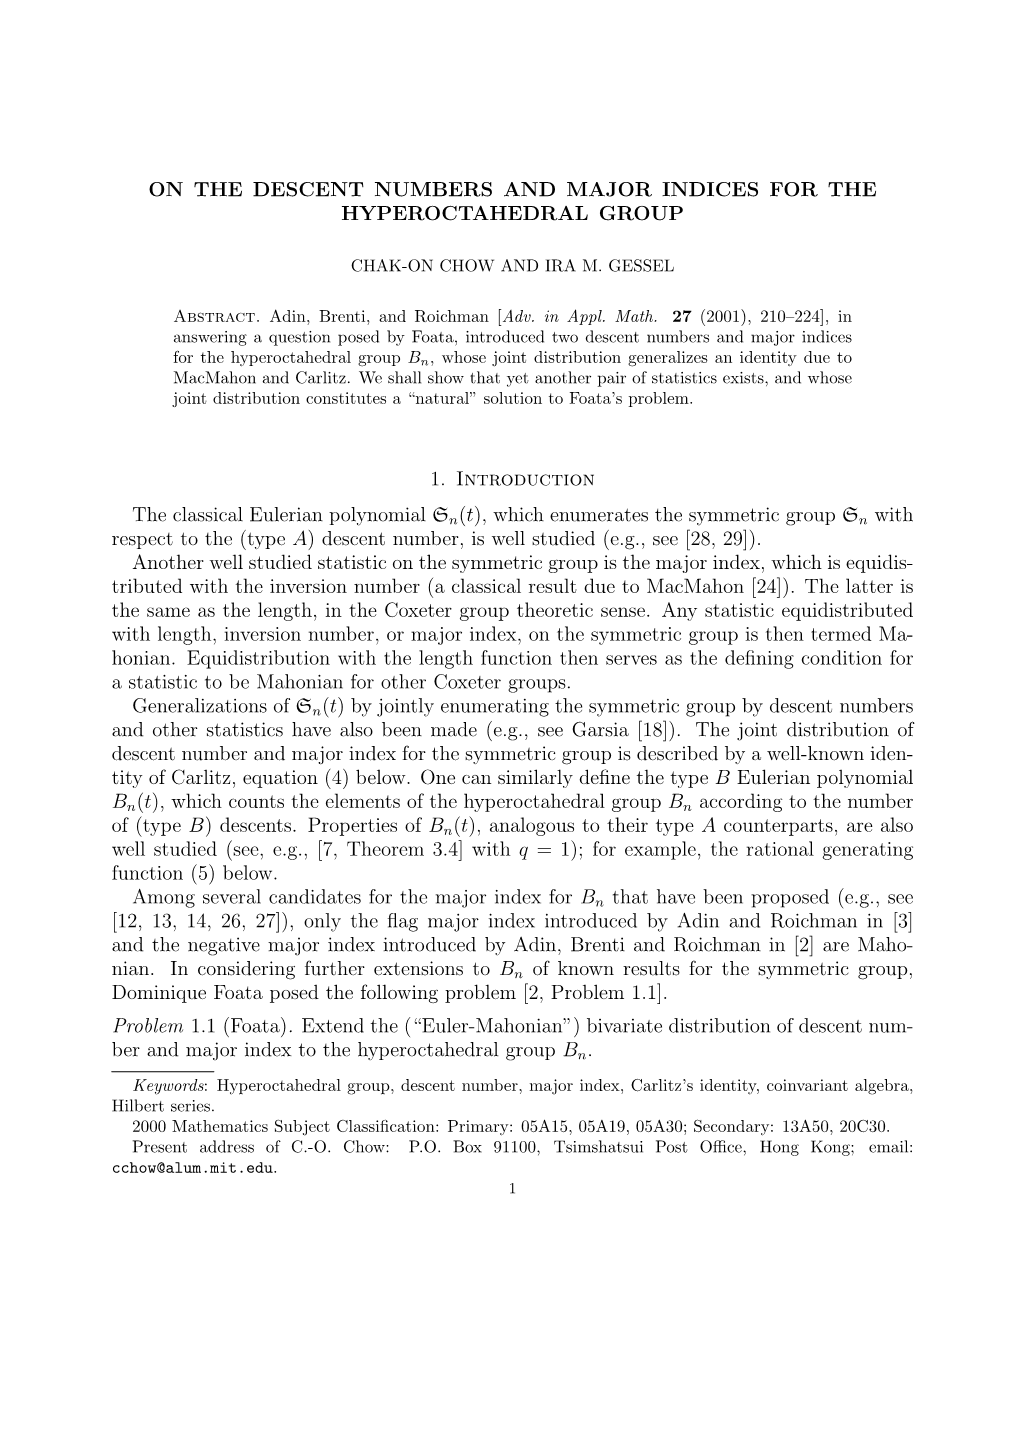 On the Descent Numbers and Major Indices for the Hyperoctahedral Group